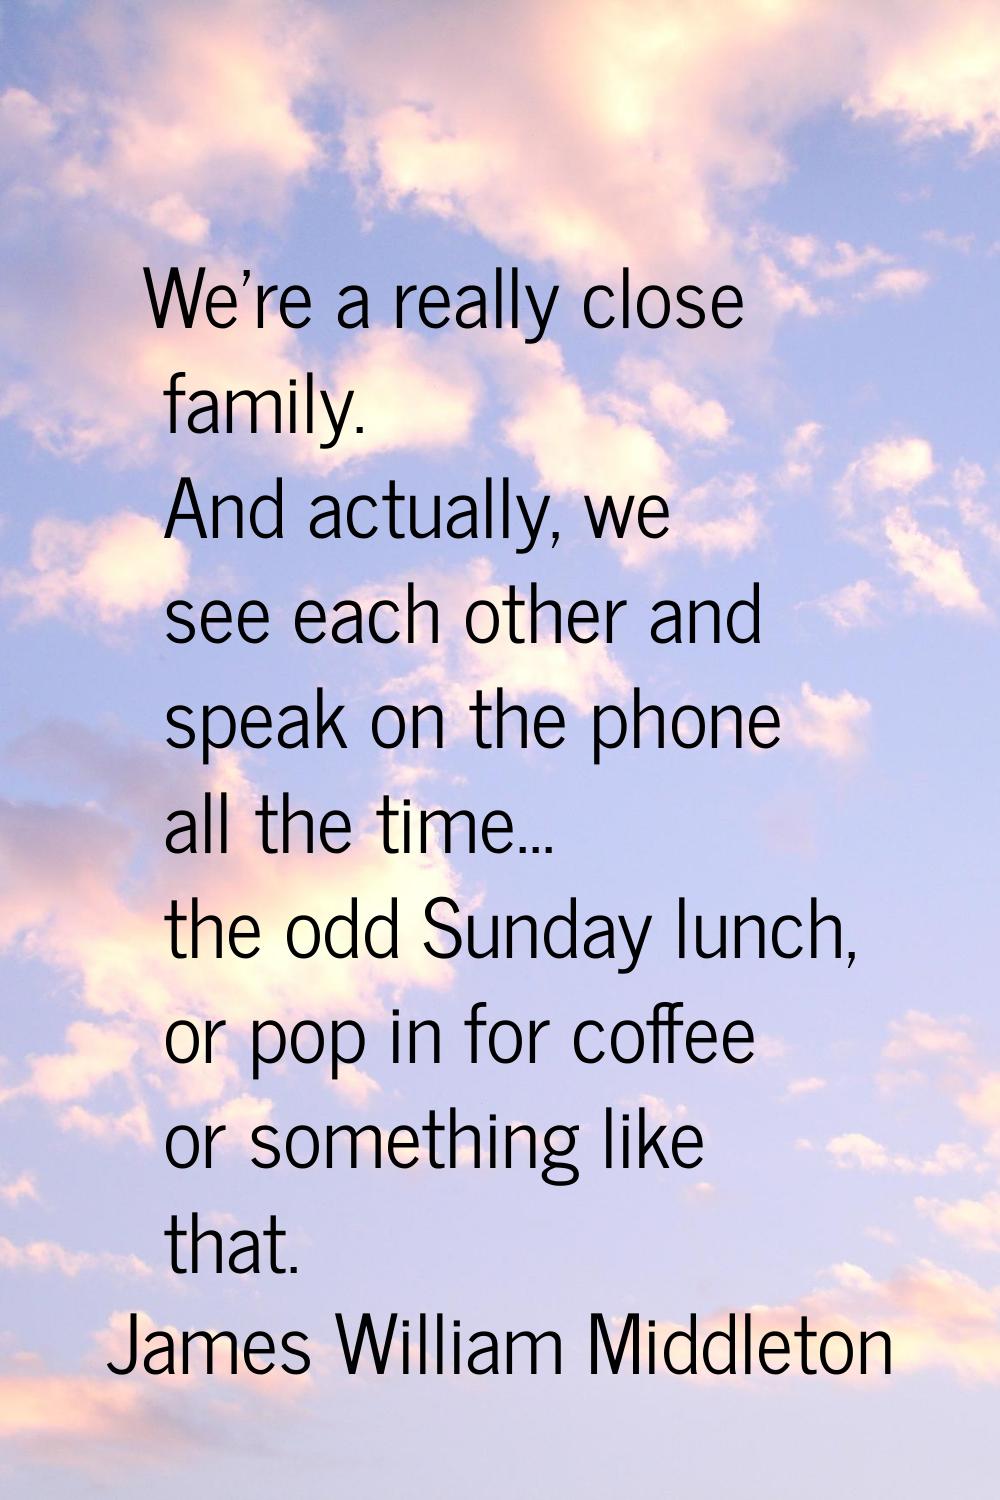 We're a really close family. And actually, we see each other and speak on the phone all the time...